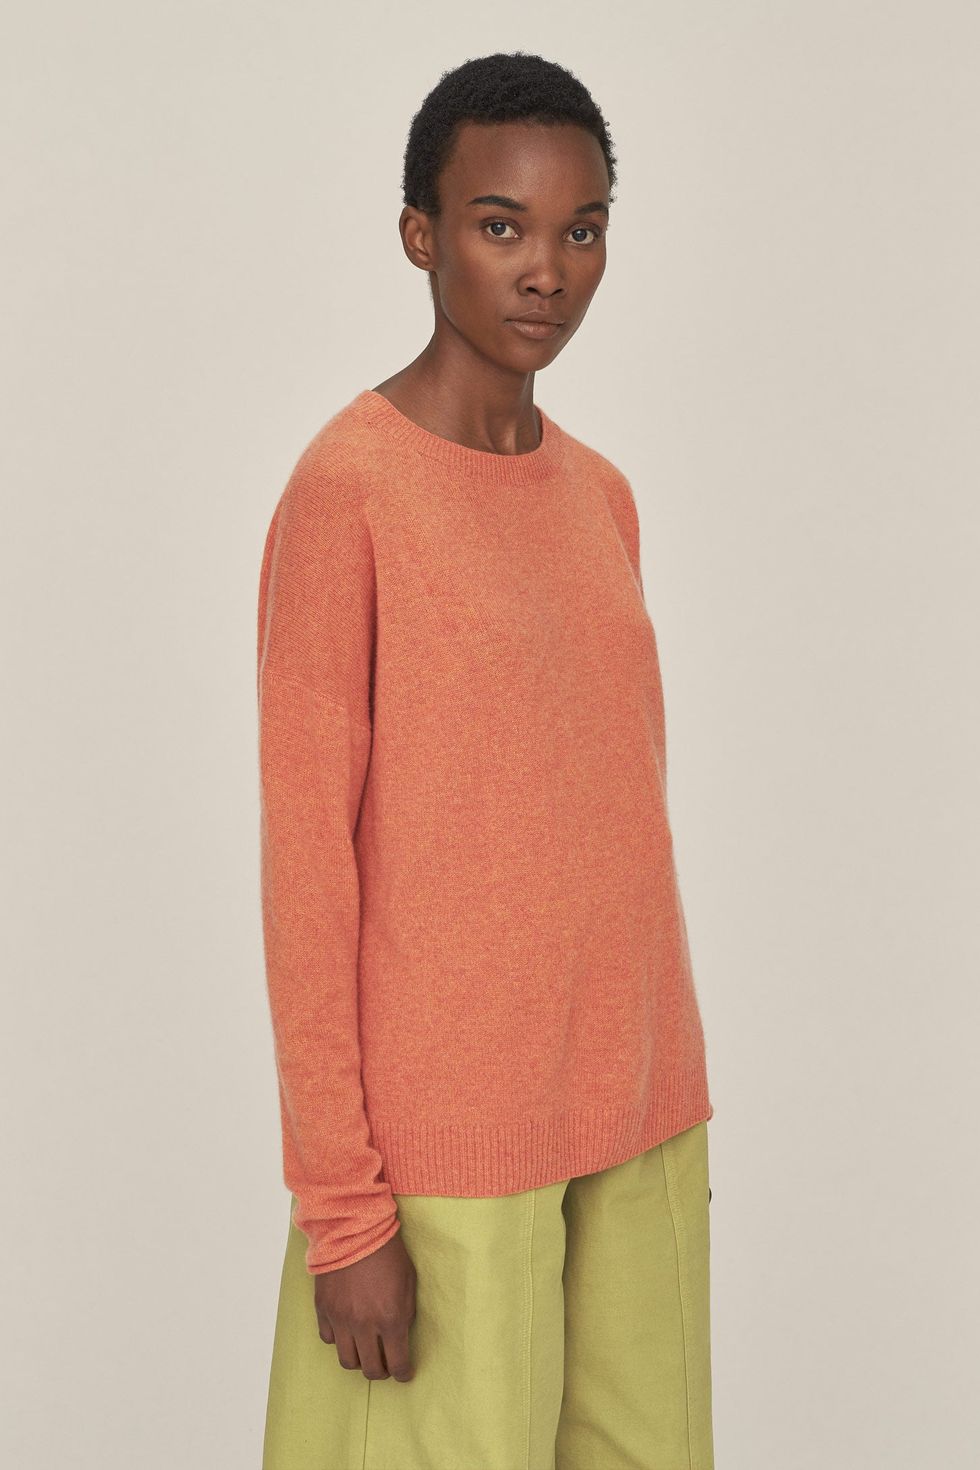 Wool Cashmere Sweater, £155